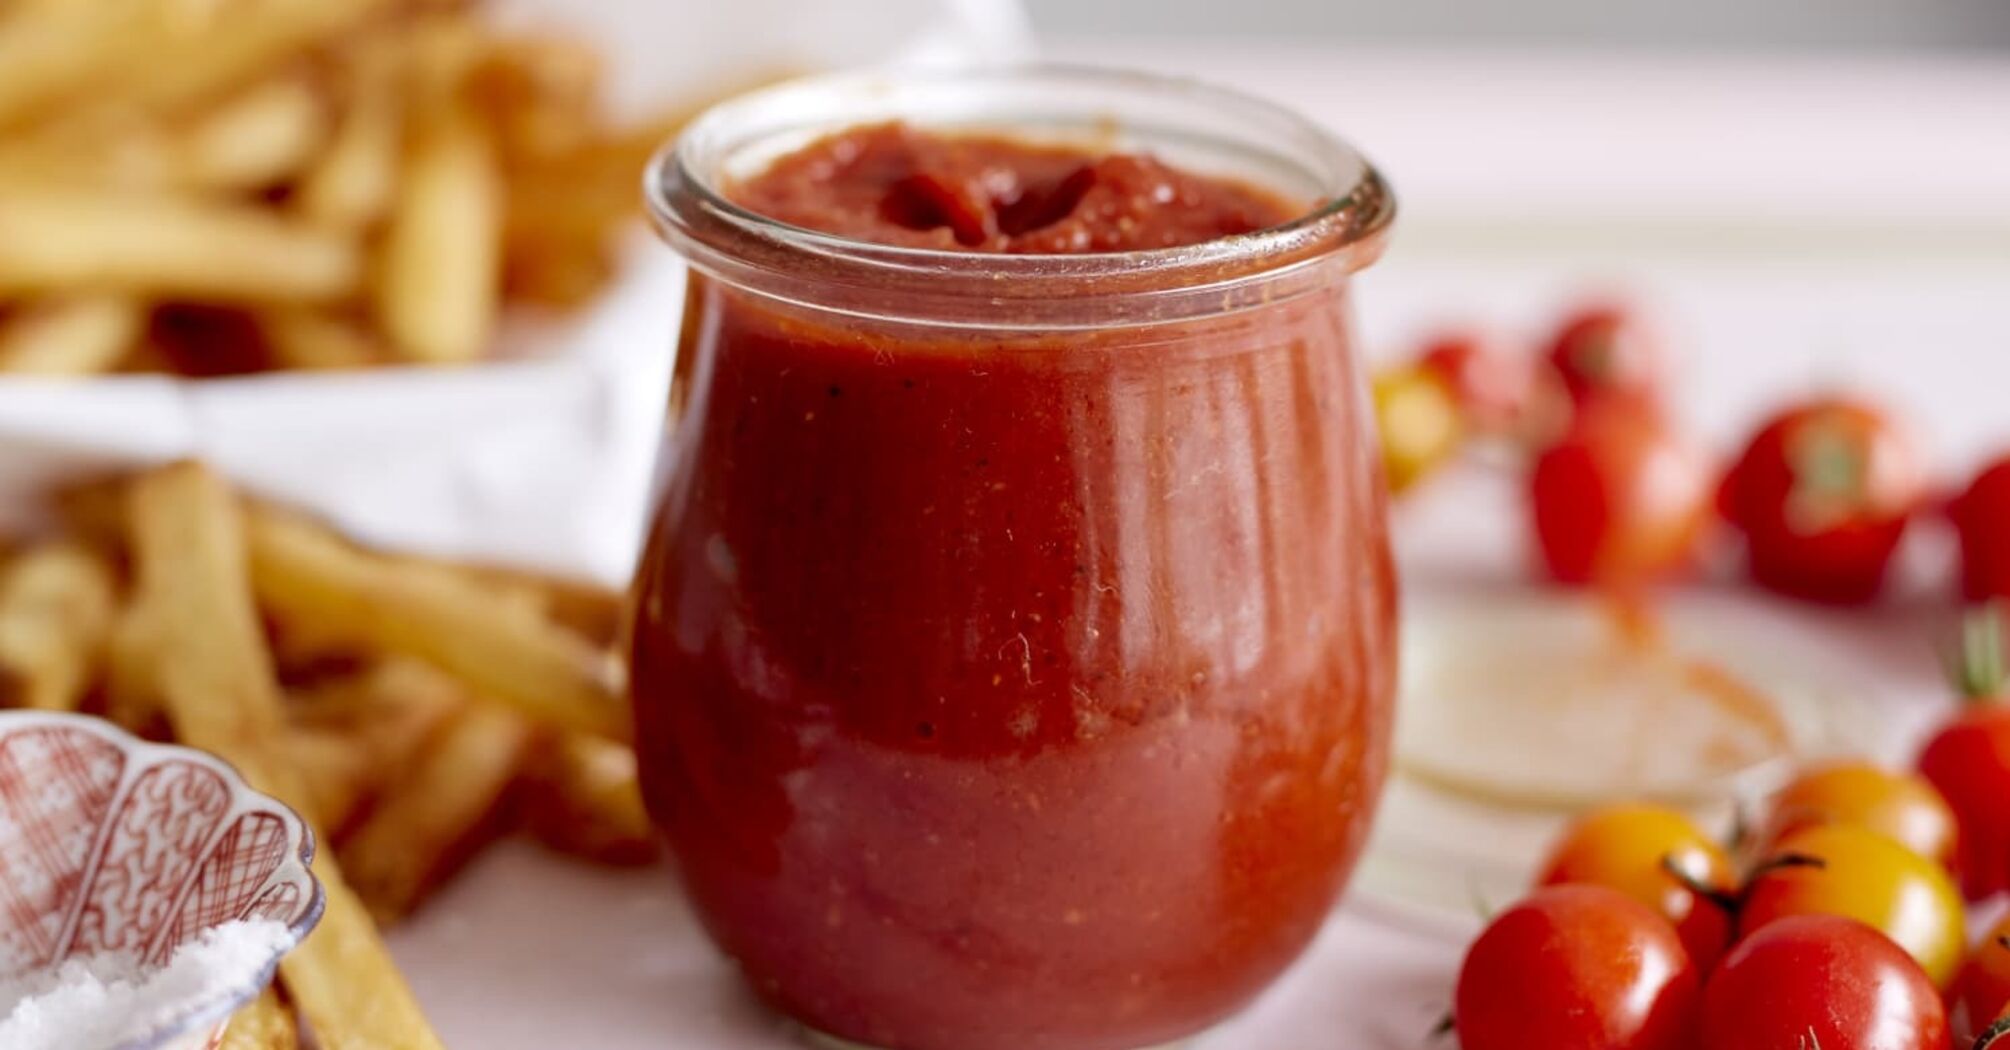 How to prepare healthy homemade ketchup with plums and beets